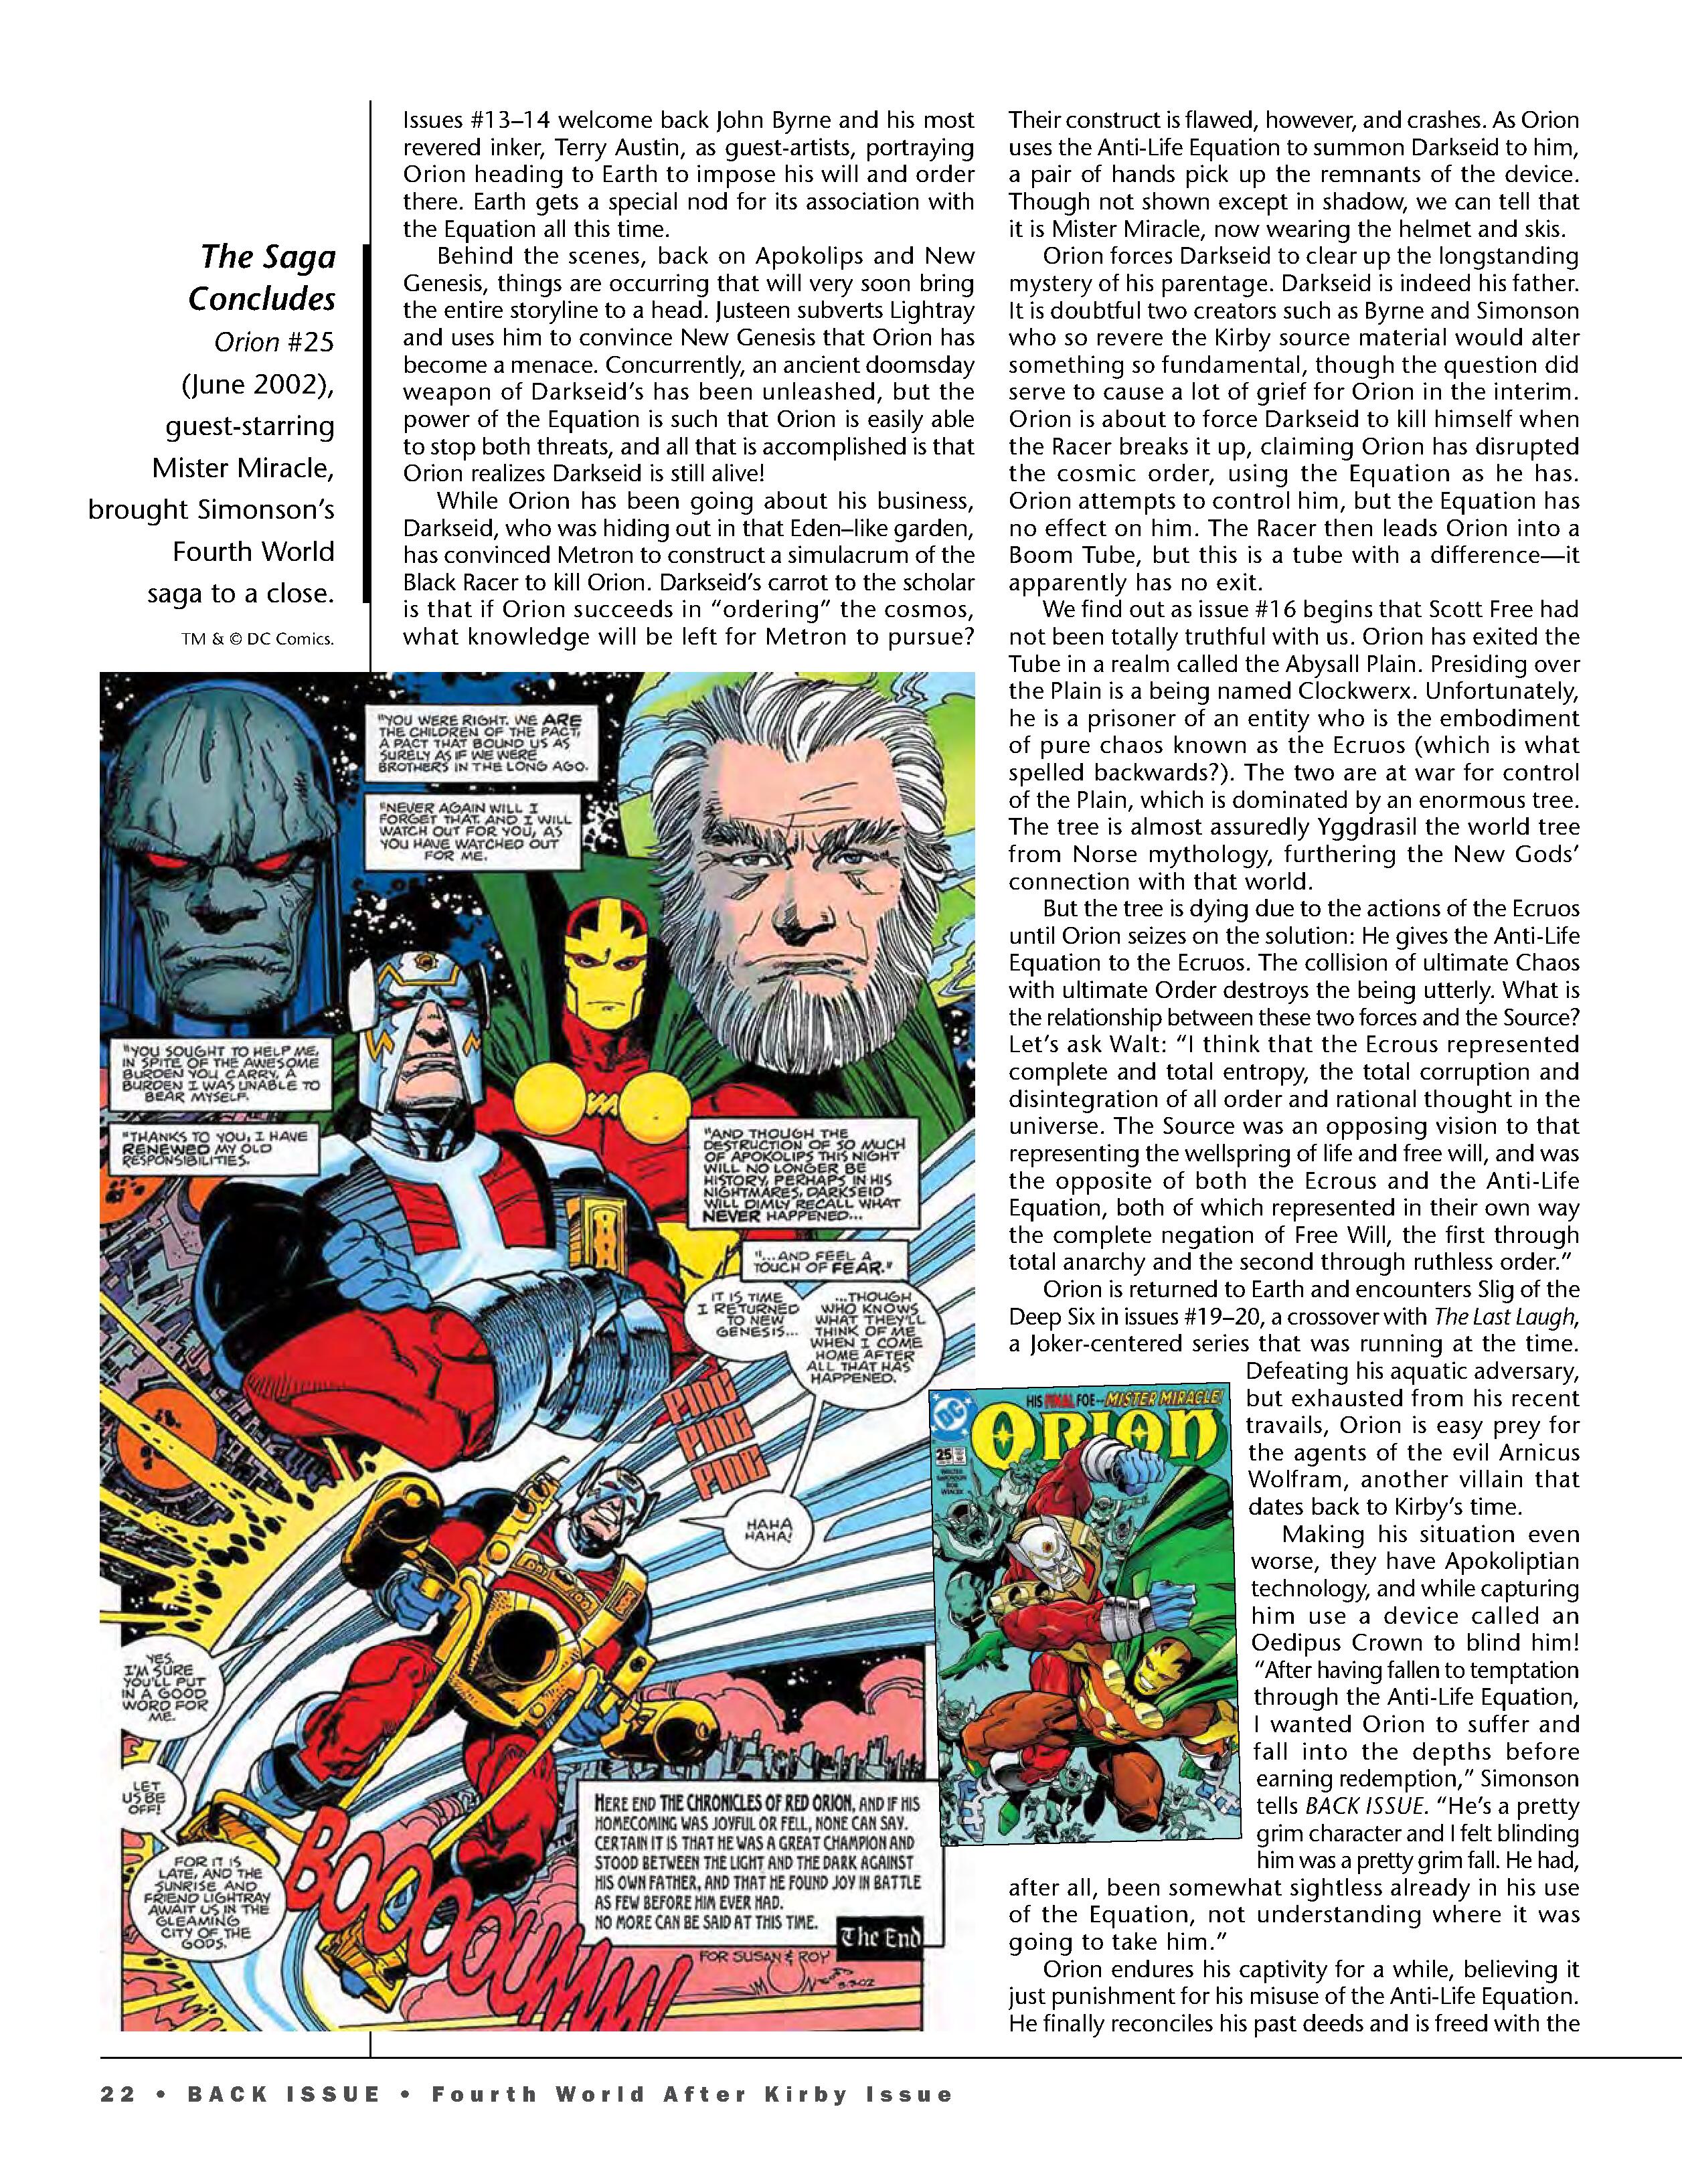 Read online Back Issue comic -  Issue #104 - 24